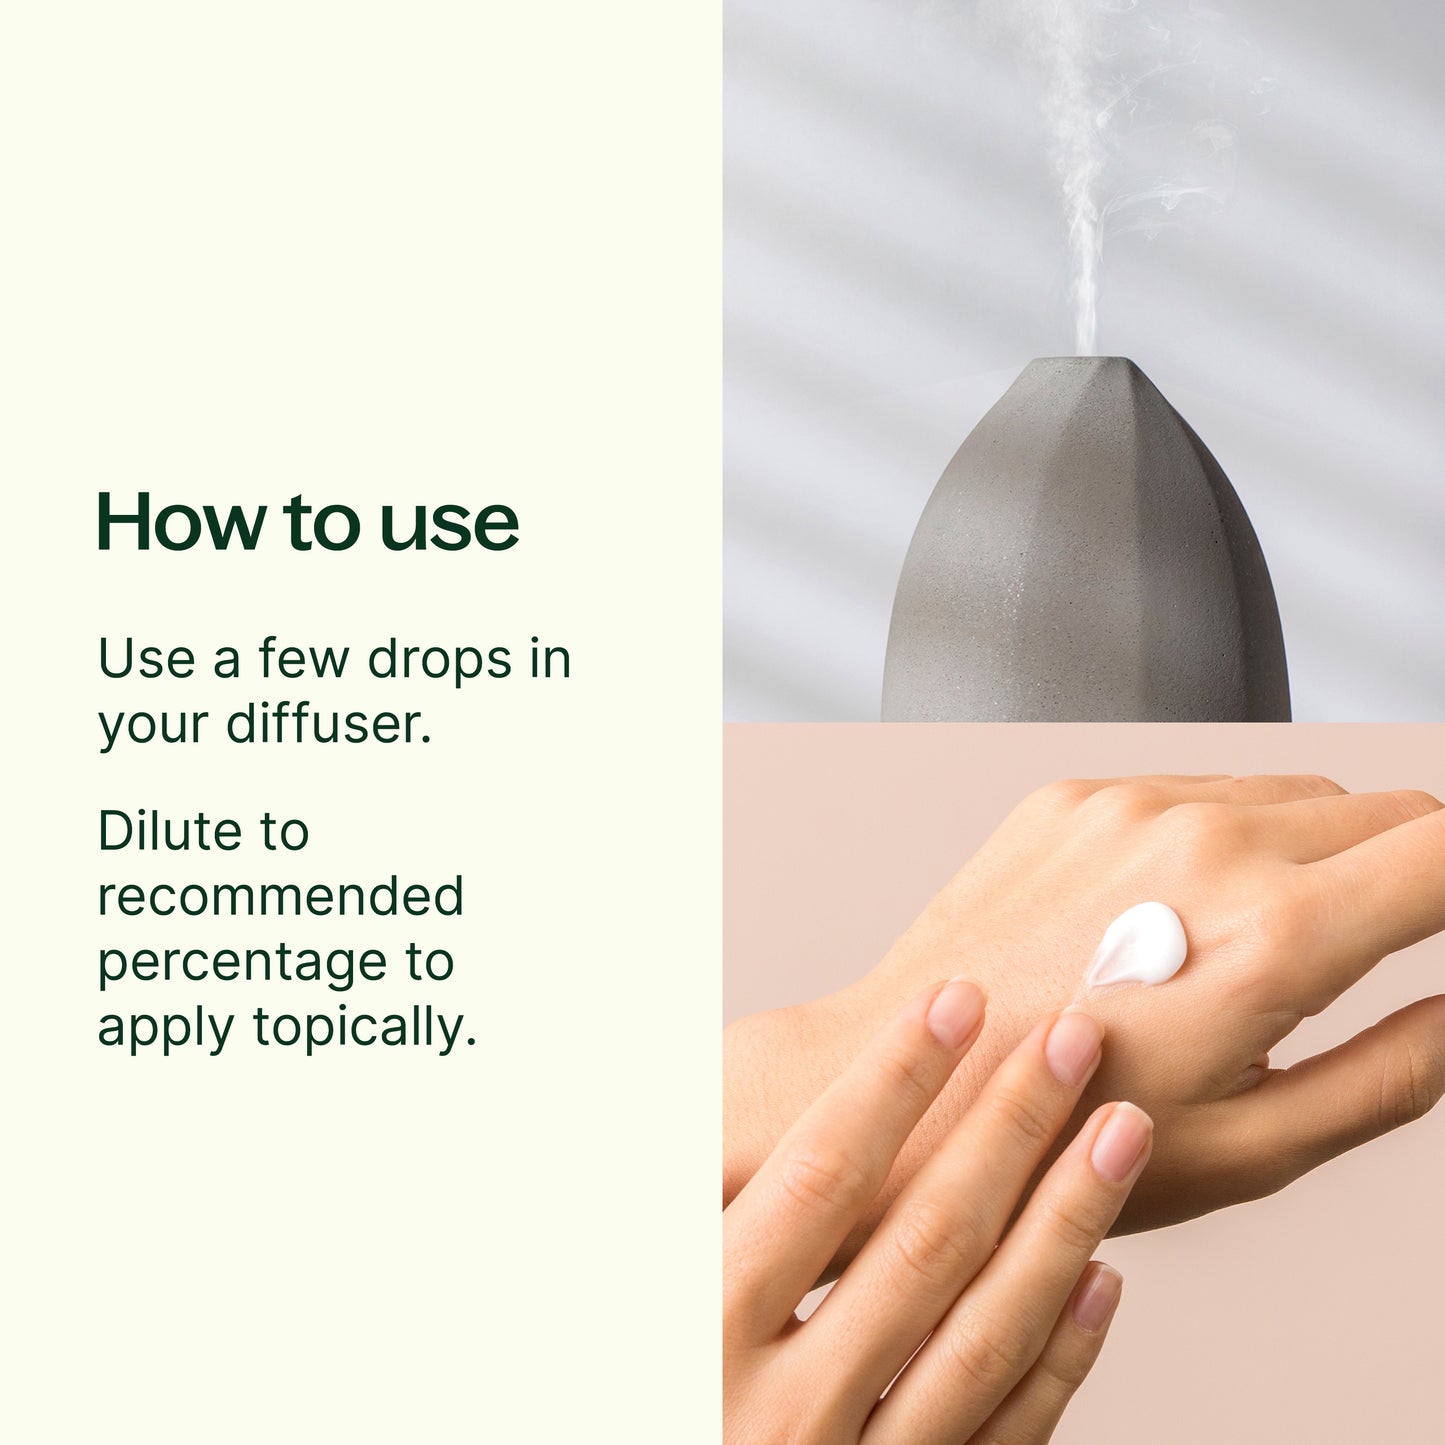 How to Use 7 & 7 Essential Oil Set: Use a few drops in your diffuser or dilute to apply topically.